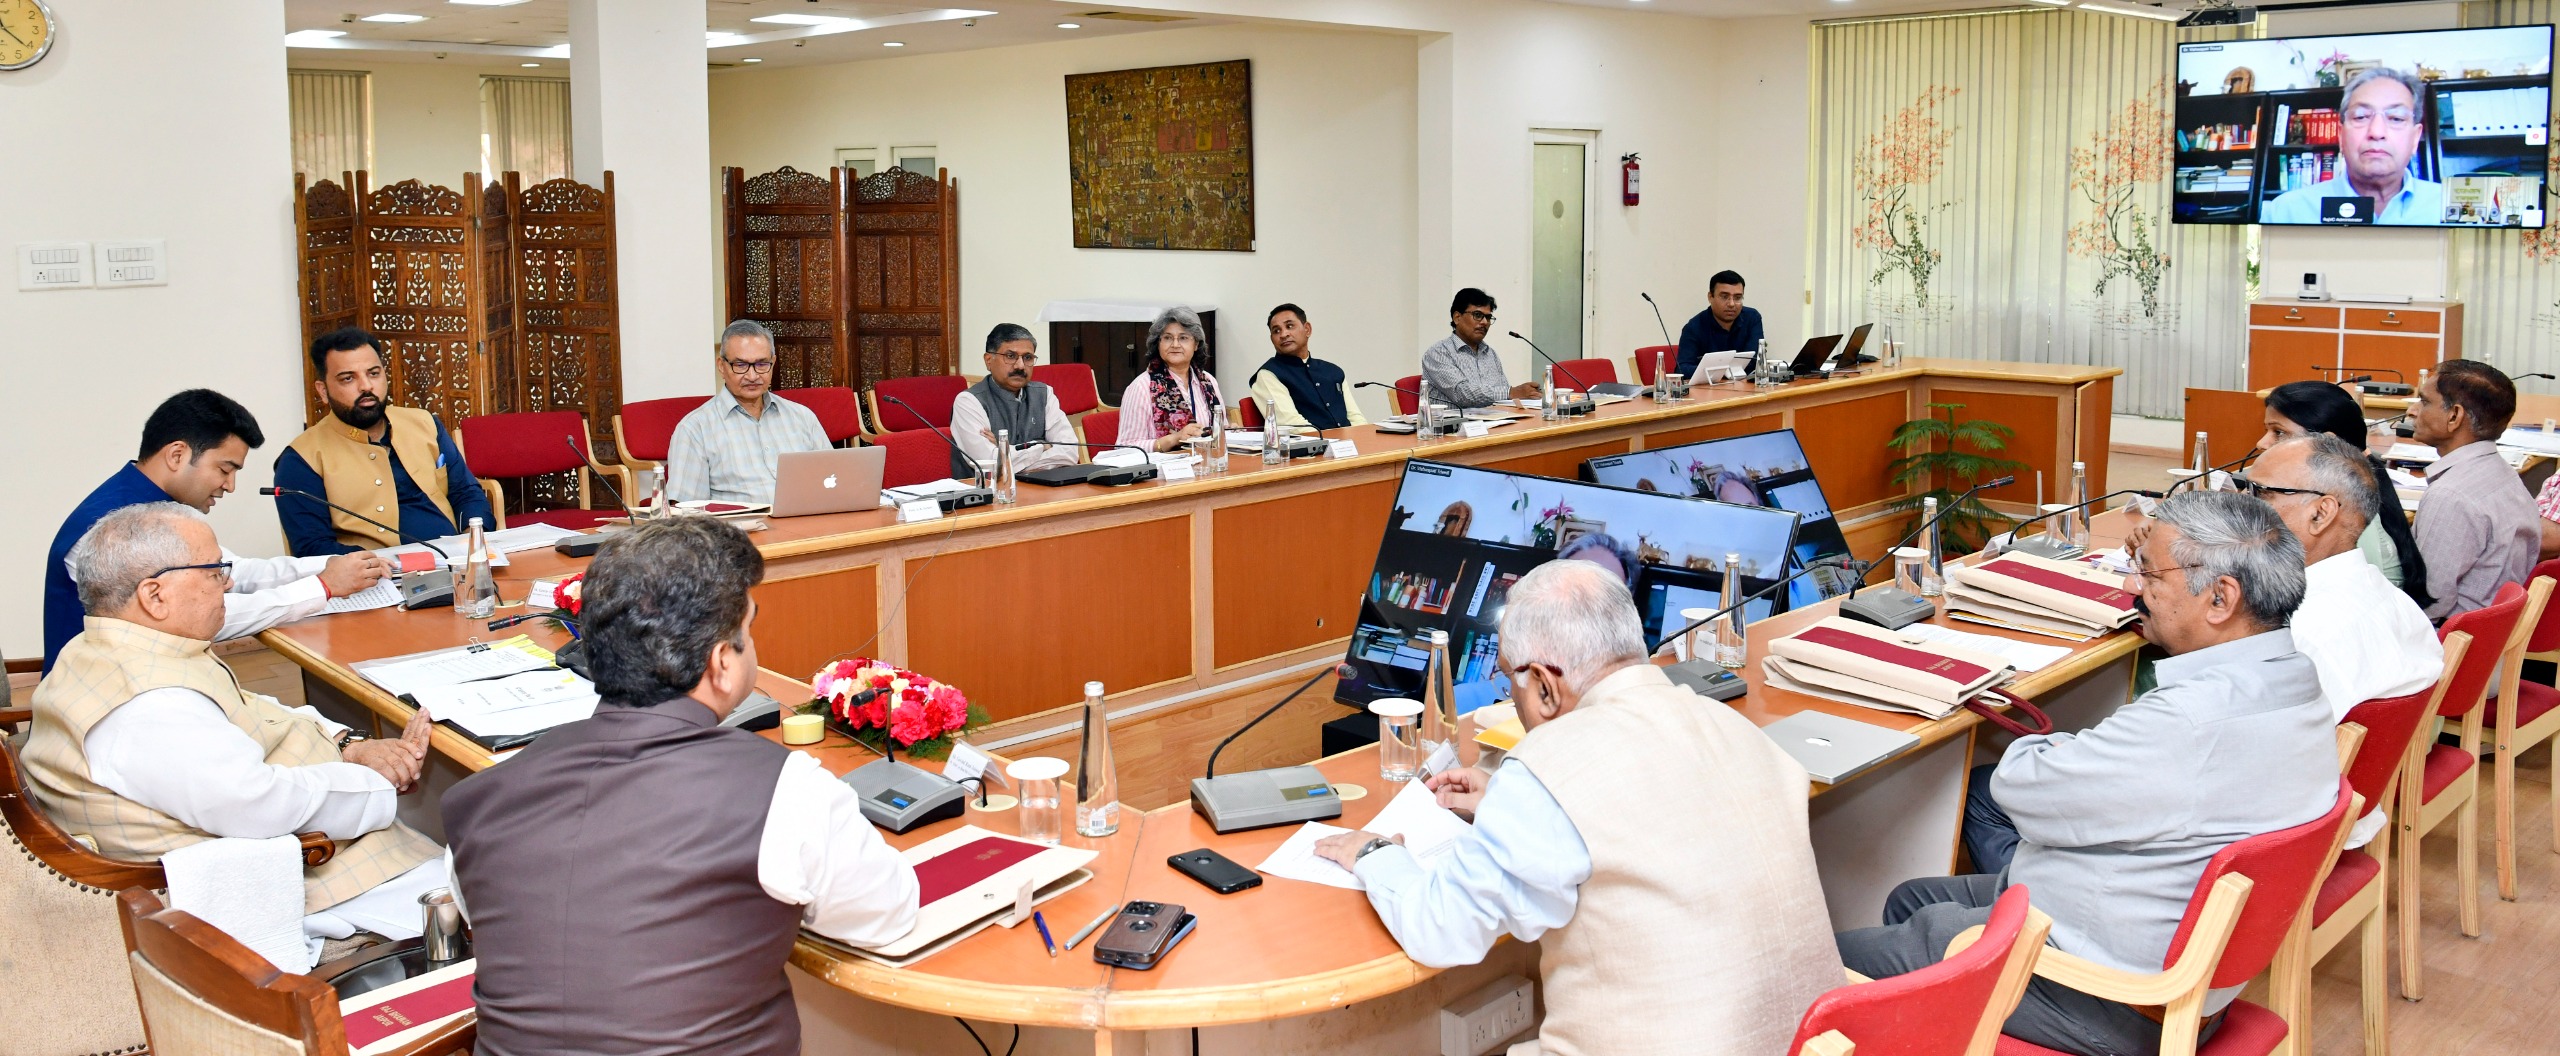 Hon'ble Governor chaired meeting of Governor's Advisory Board at Raj Bhawan, Jaipur.